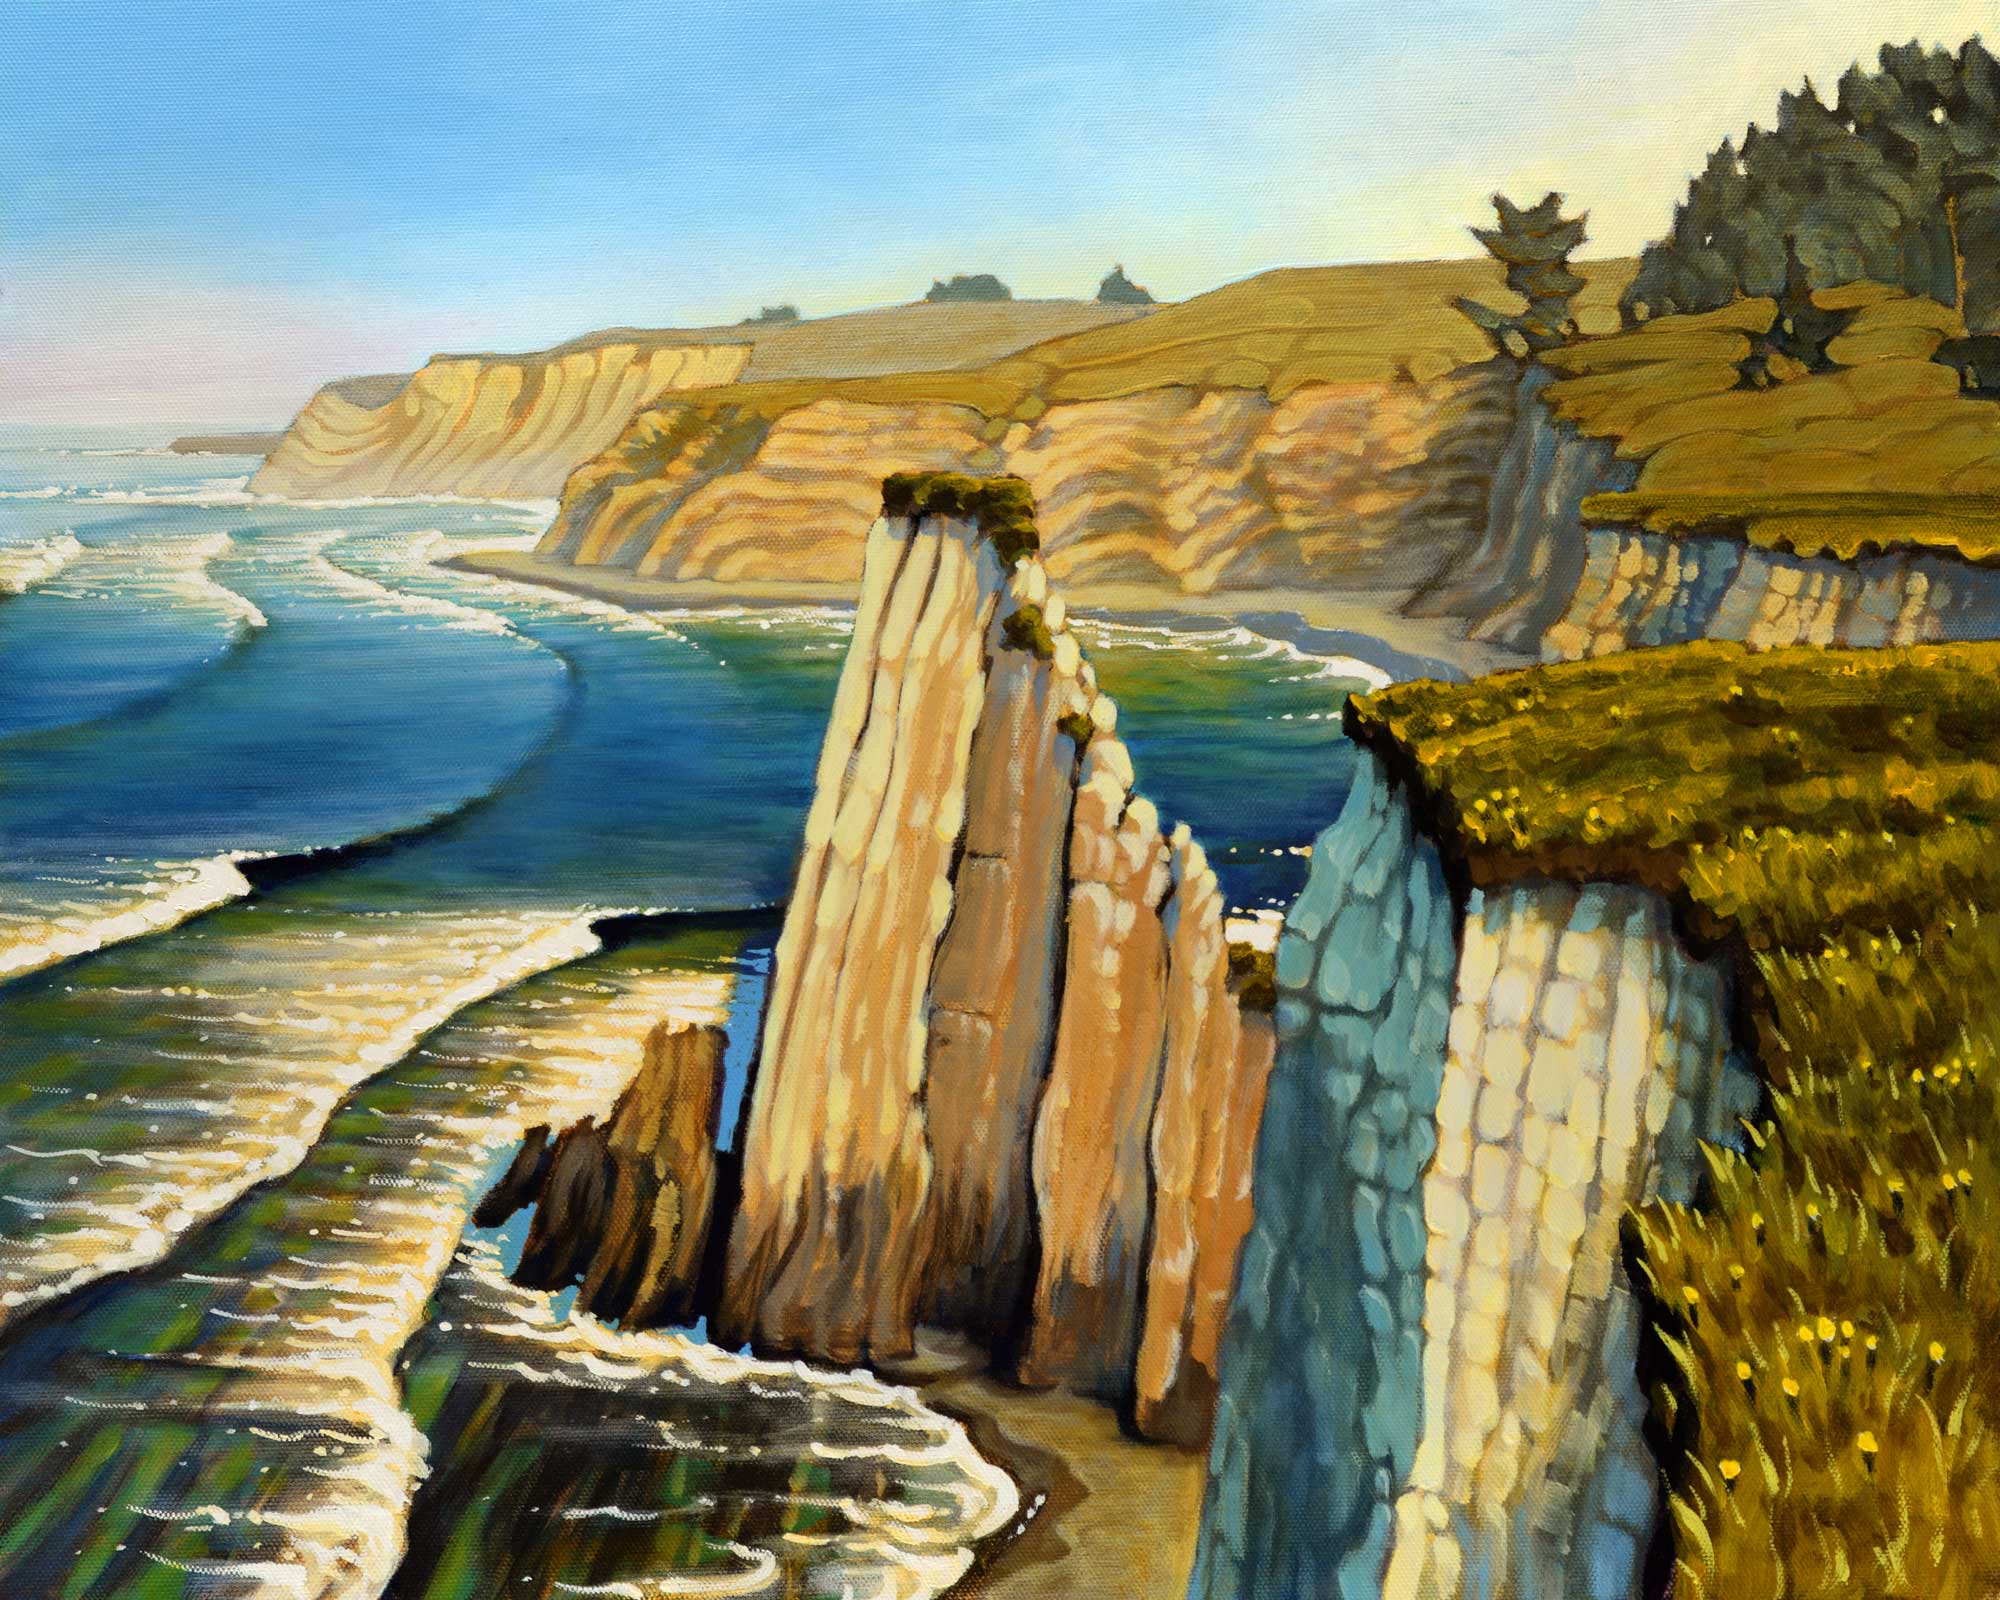 A plein air painting of the steep cliffs of the Pelican Bluffs trail on the Mendocino coast of northern California